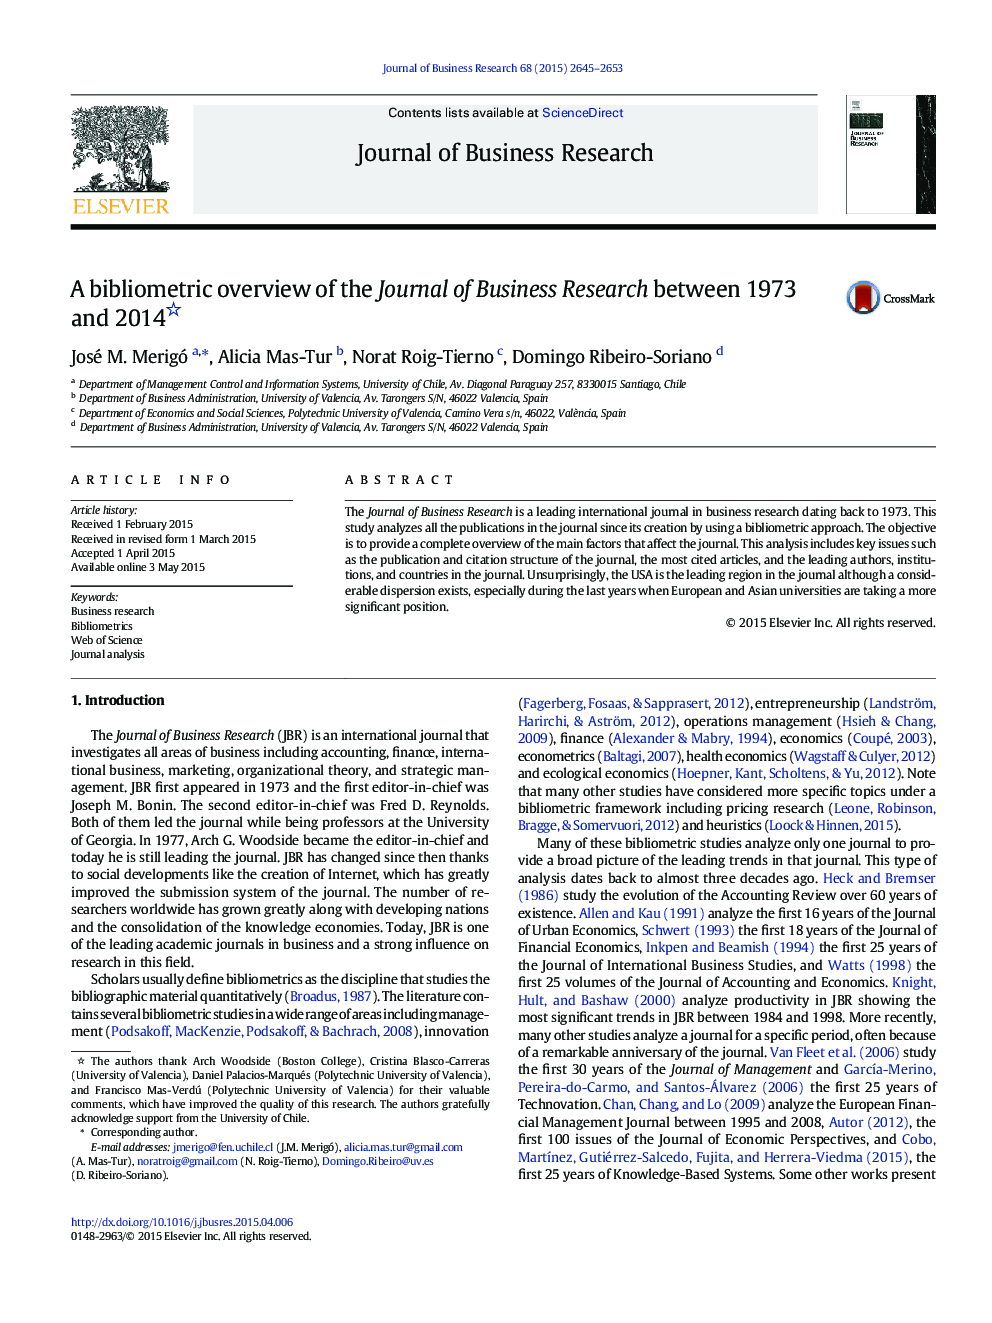 A bibliometric overview of the Journal of Business Research between 1973 and 2014 